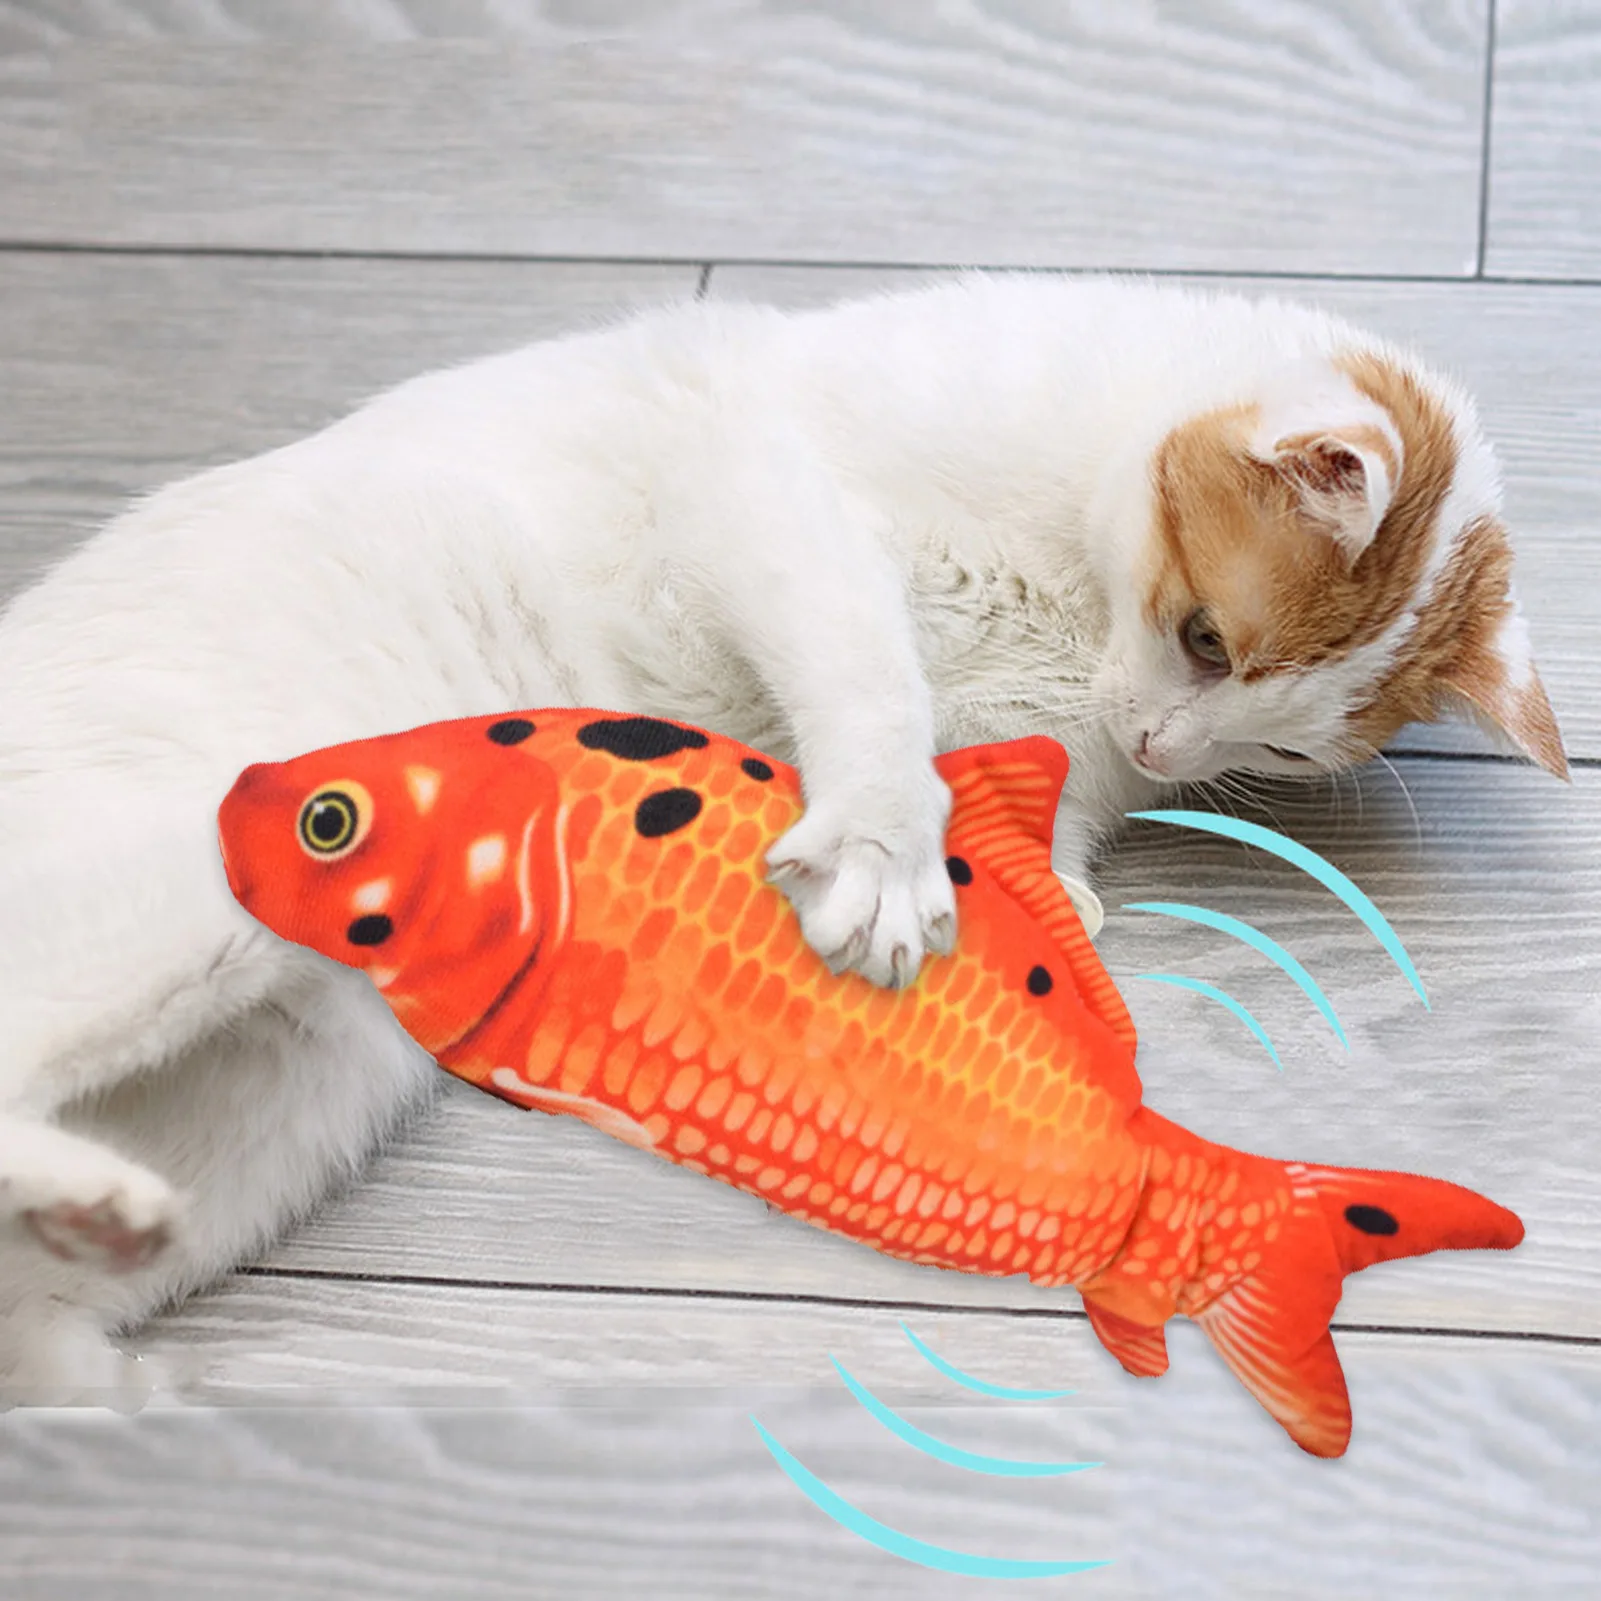 New Cat USB Charger 3D Floppy Fish Interactive Electric Toy Realistic Plush Simulation Wiggle Fish Catnip Indoor Chewing Playing